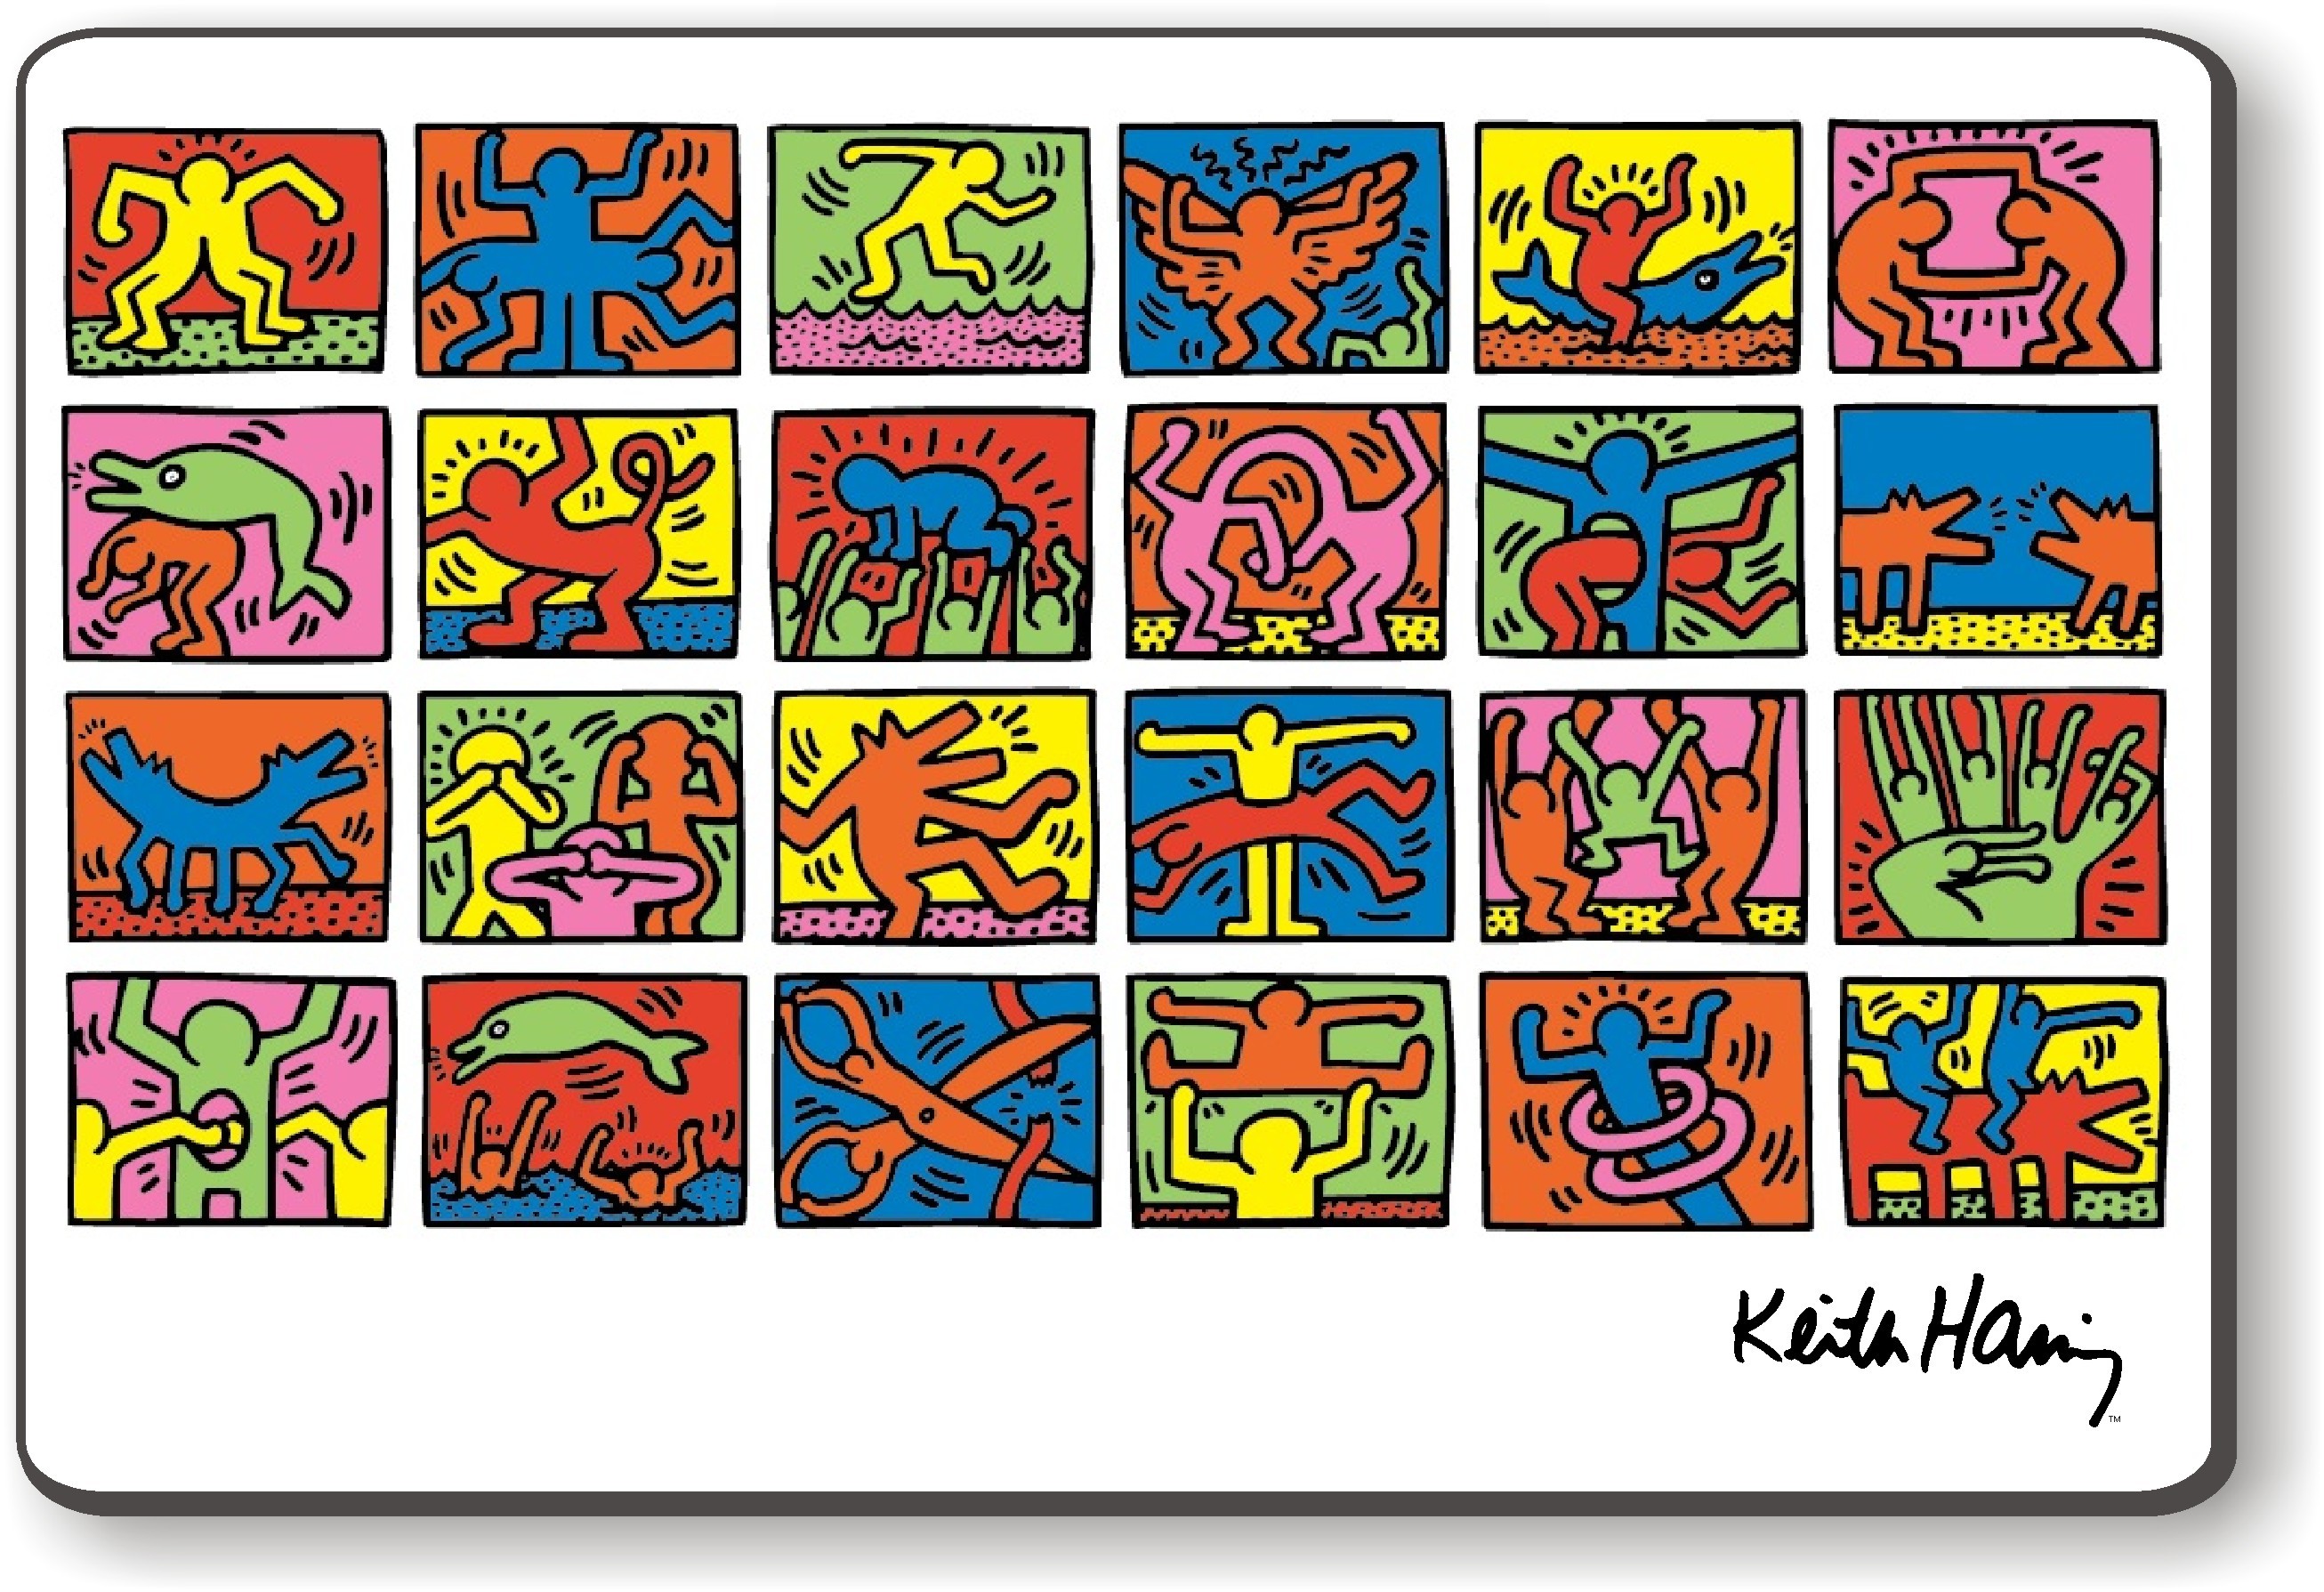 2612x1789 Keith haring was born on May 4,1958 in Pennsylvania. He came to New York  City as a scholarship student at the school of Visual Arts .Haring emerged  as a ...